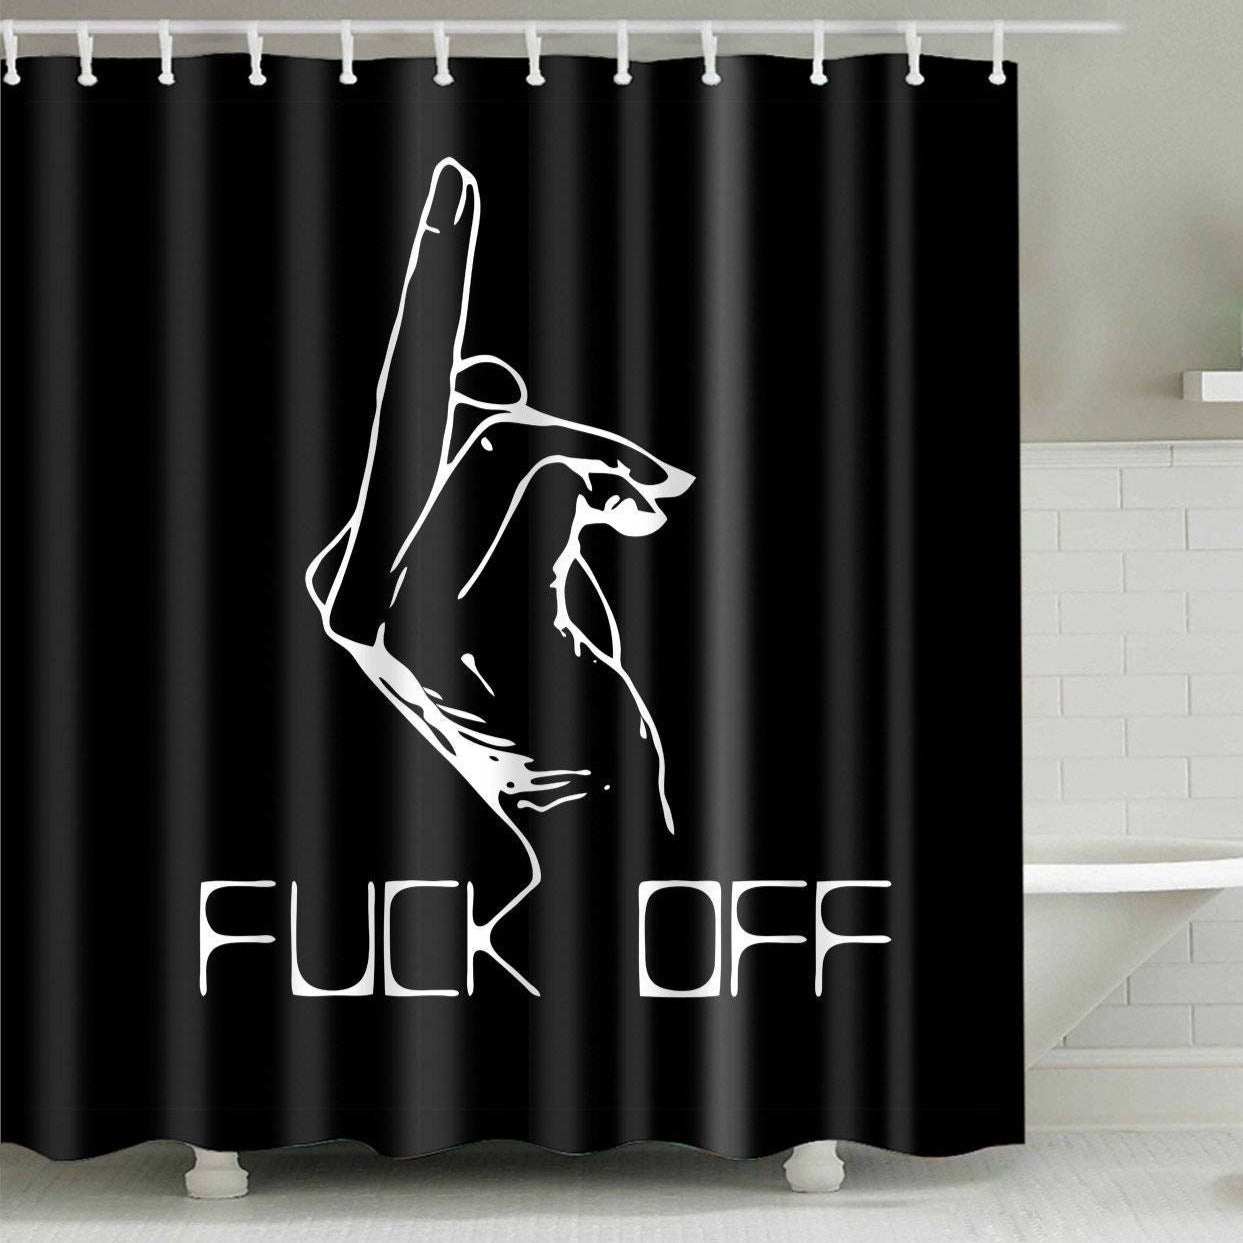 Rude Shower Curtains